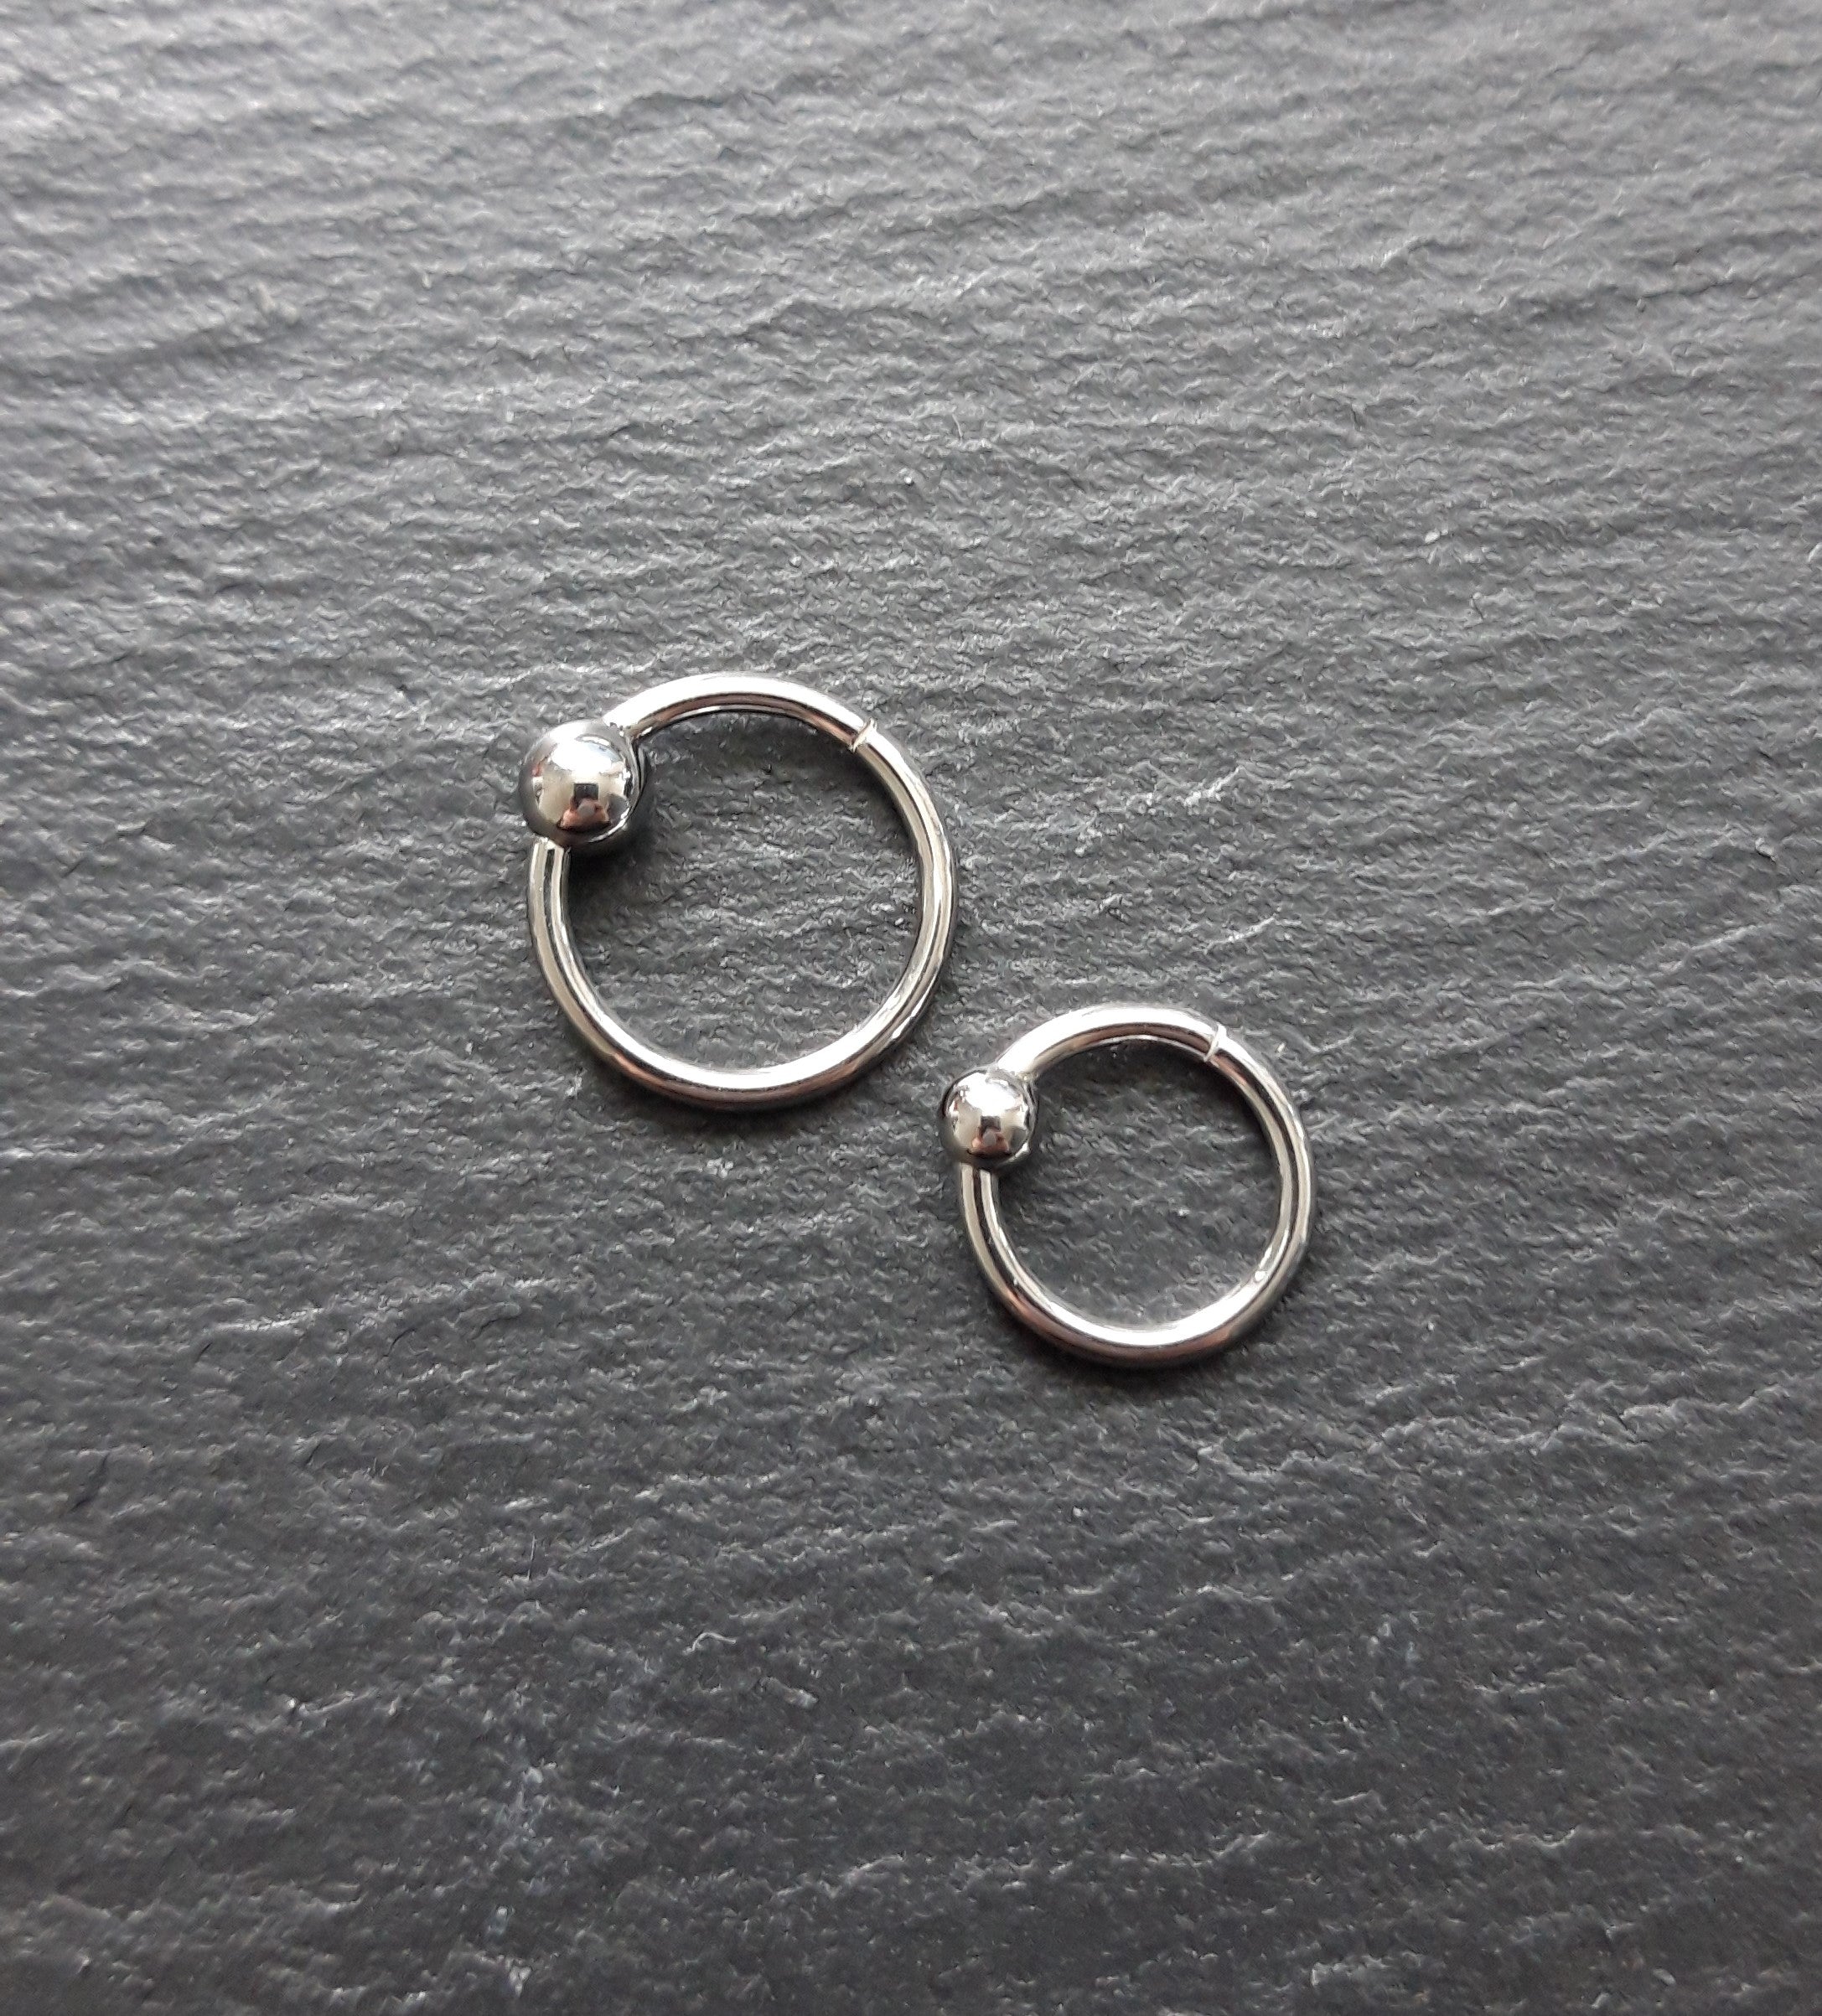 Steel Segment Ring Clicker with ball - thickness 1.2mm